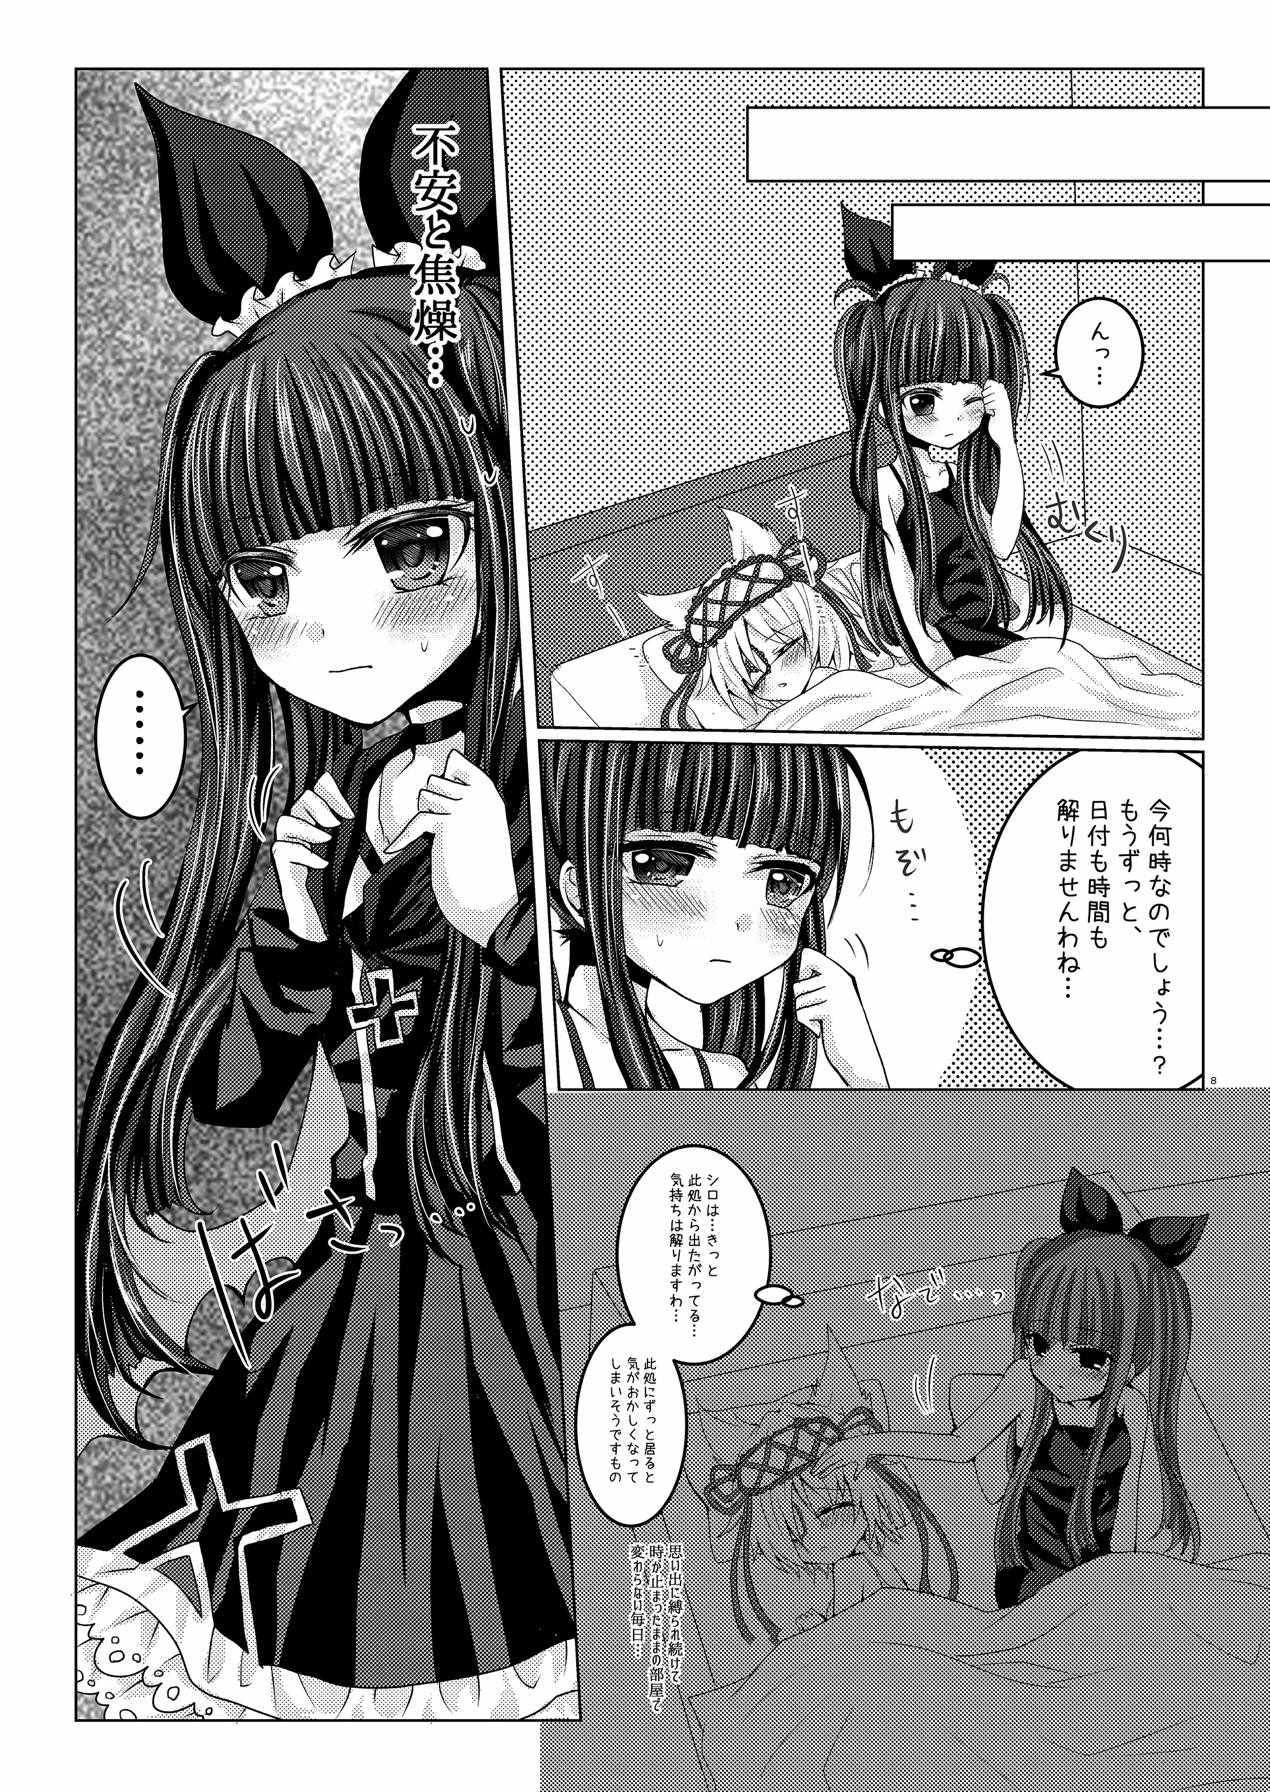 Naturaltits Torikago Shoujo - Emil chronicle online Amador - Page 7